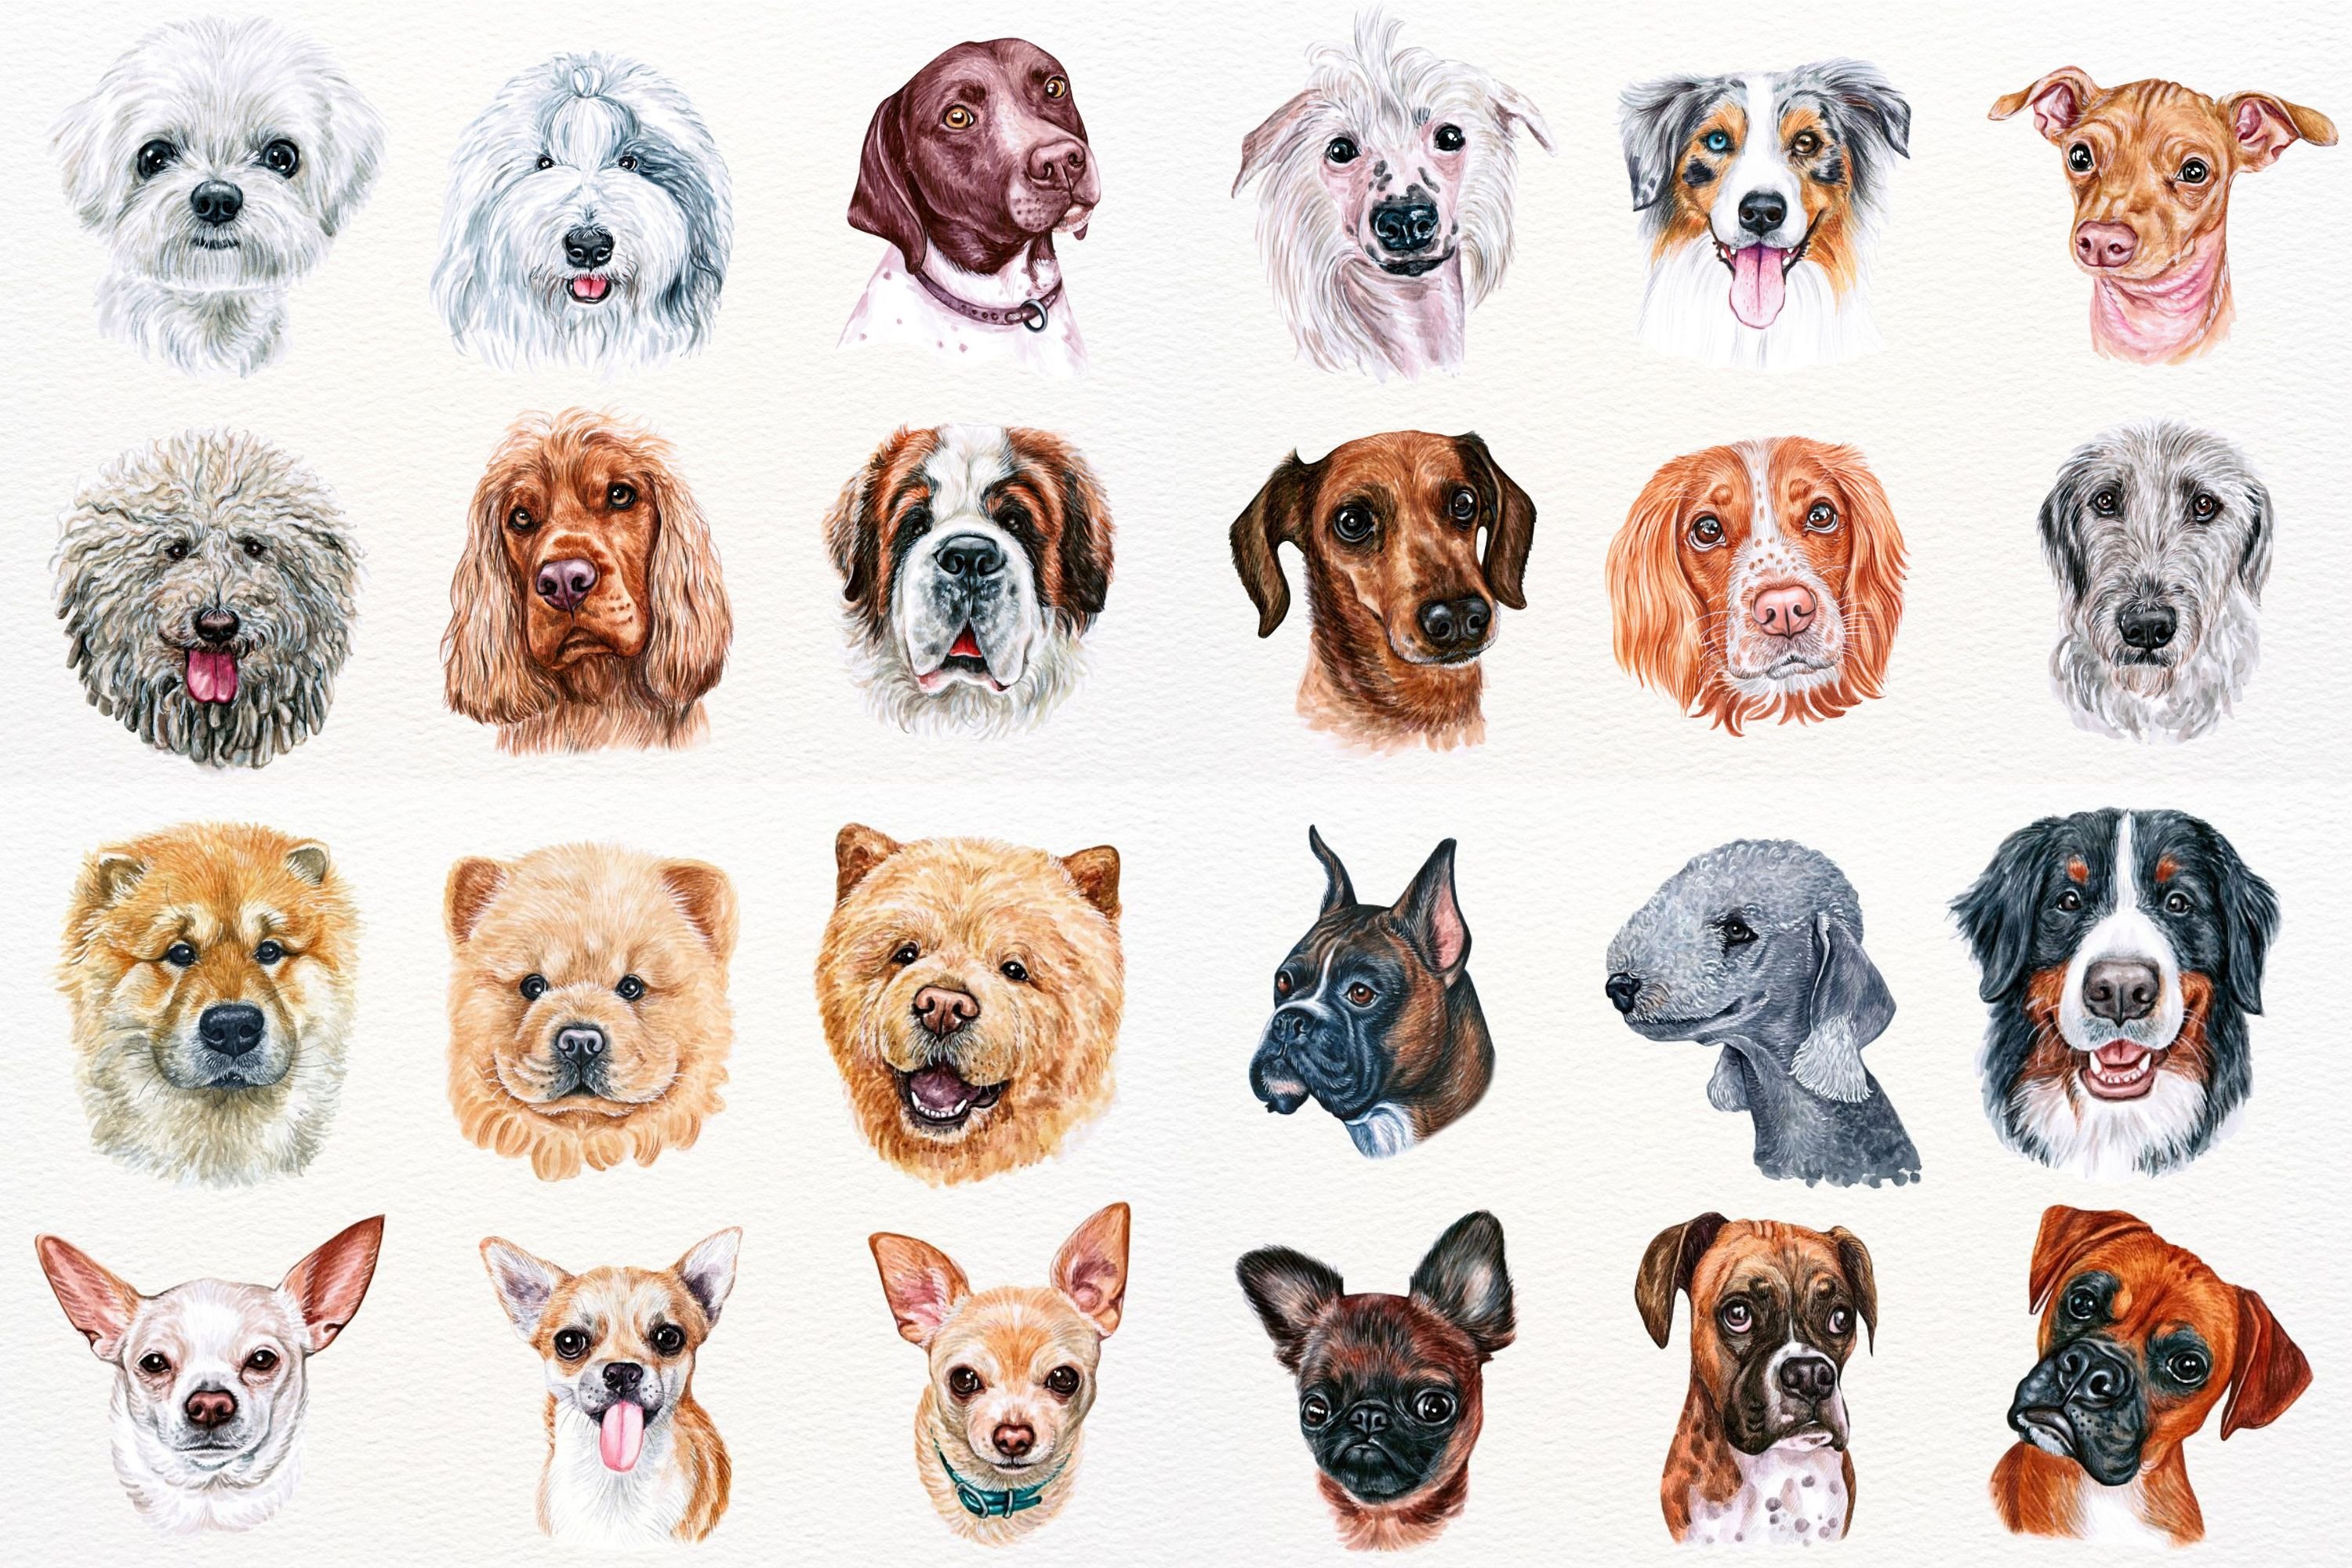 So cute dogs collection.